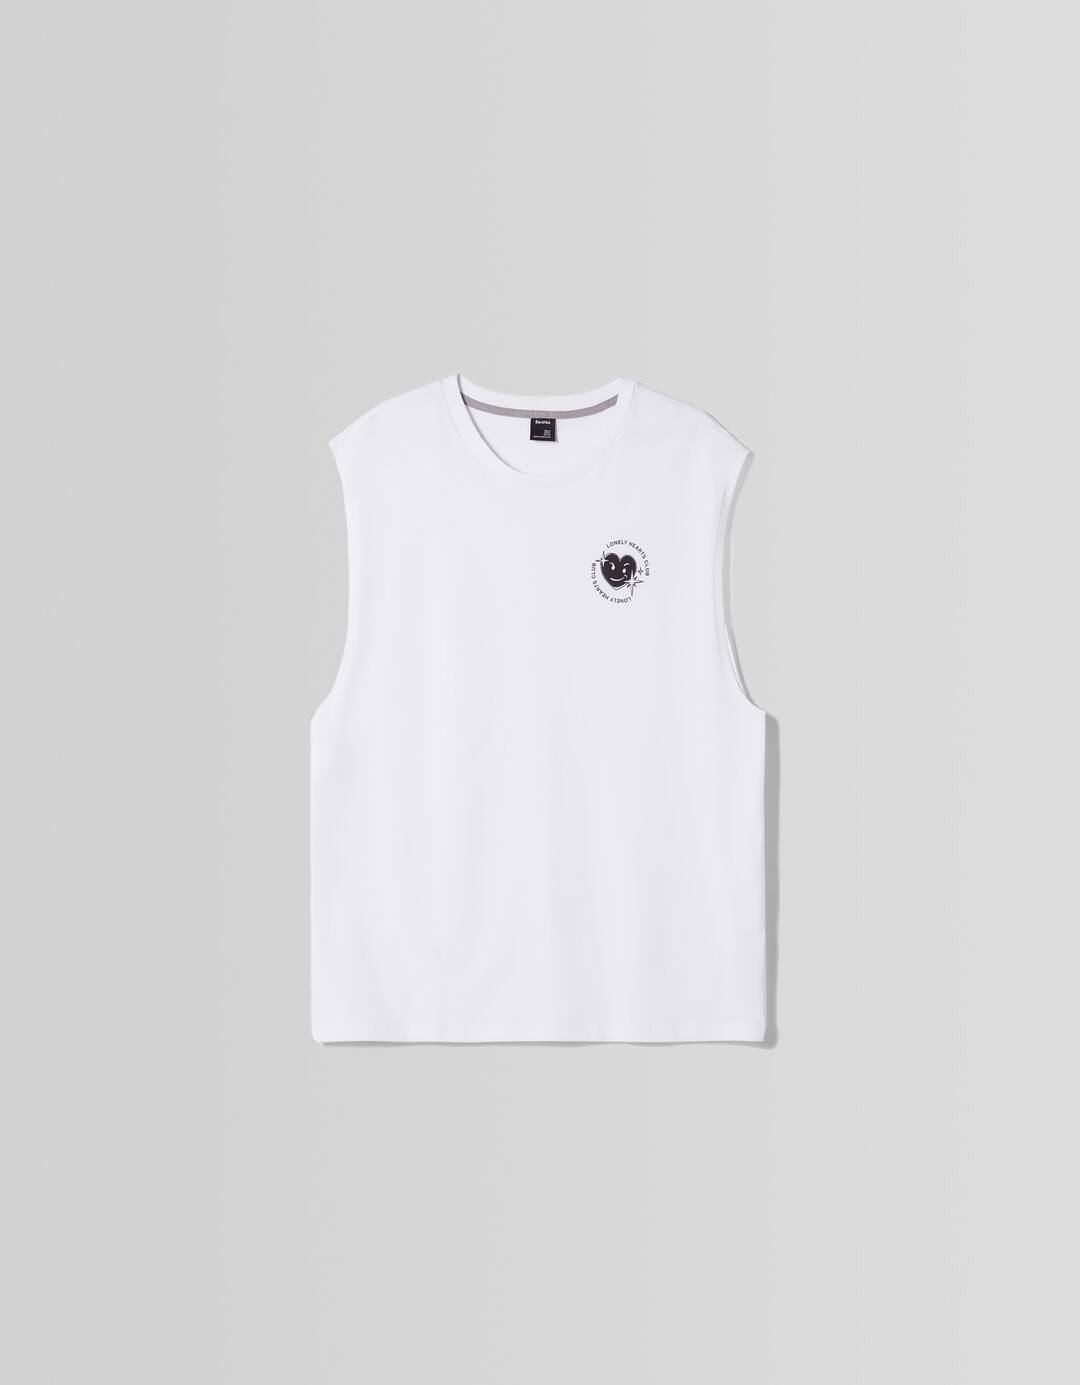 Worker-style fit sleeveless T-shirt